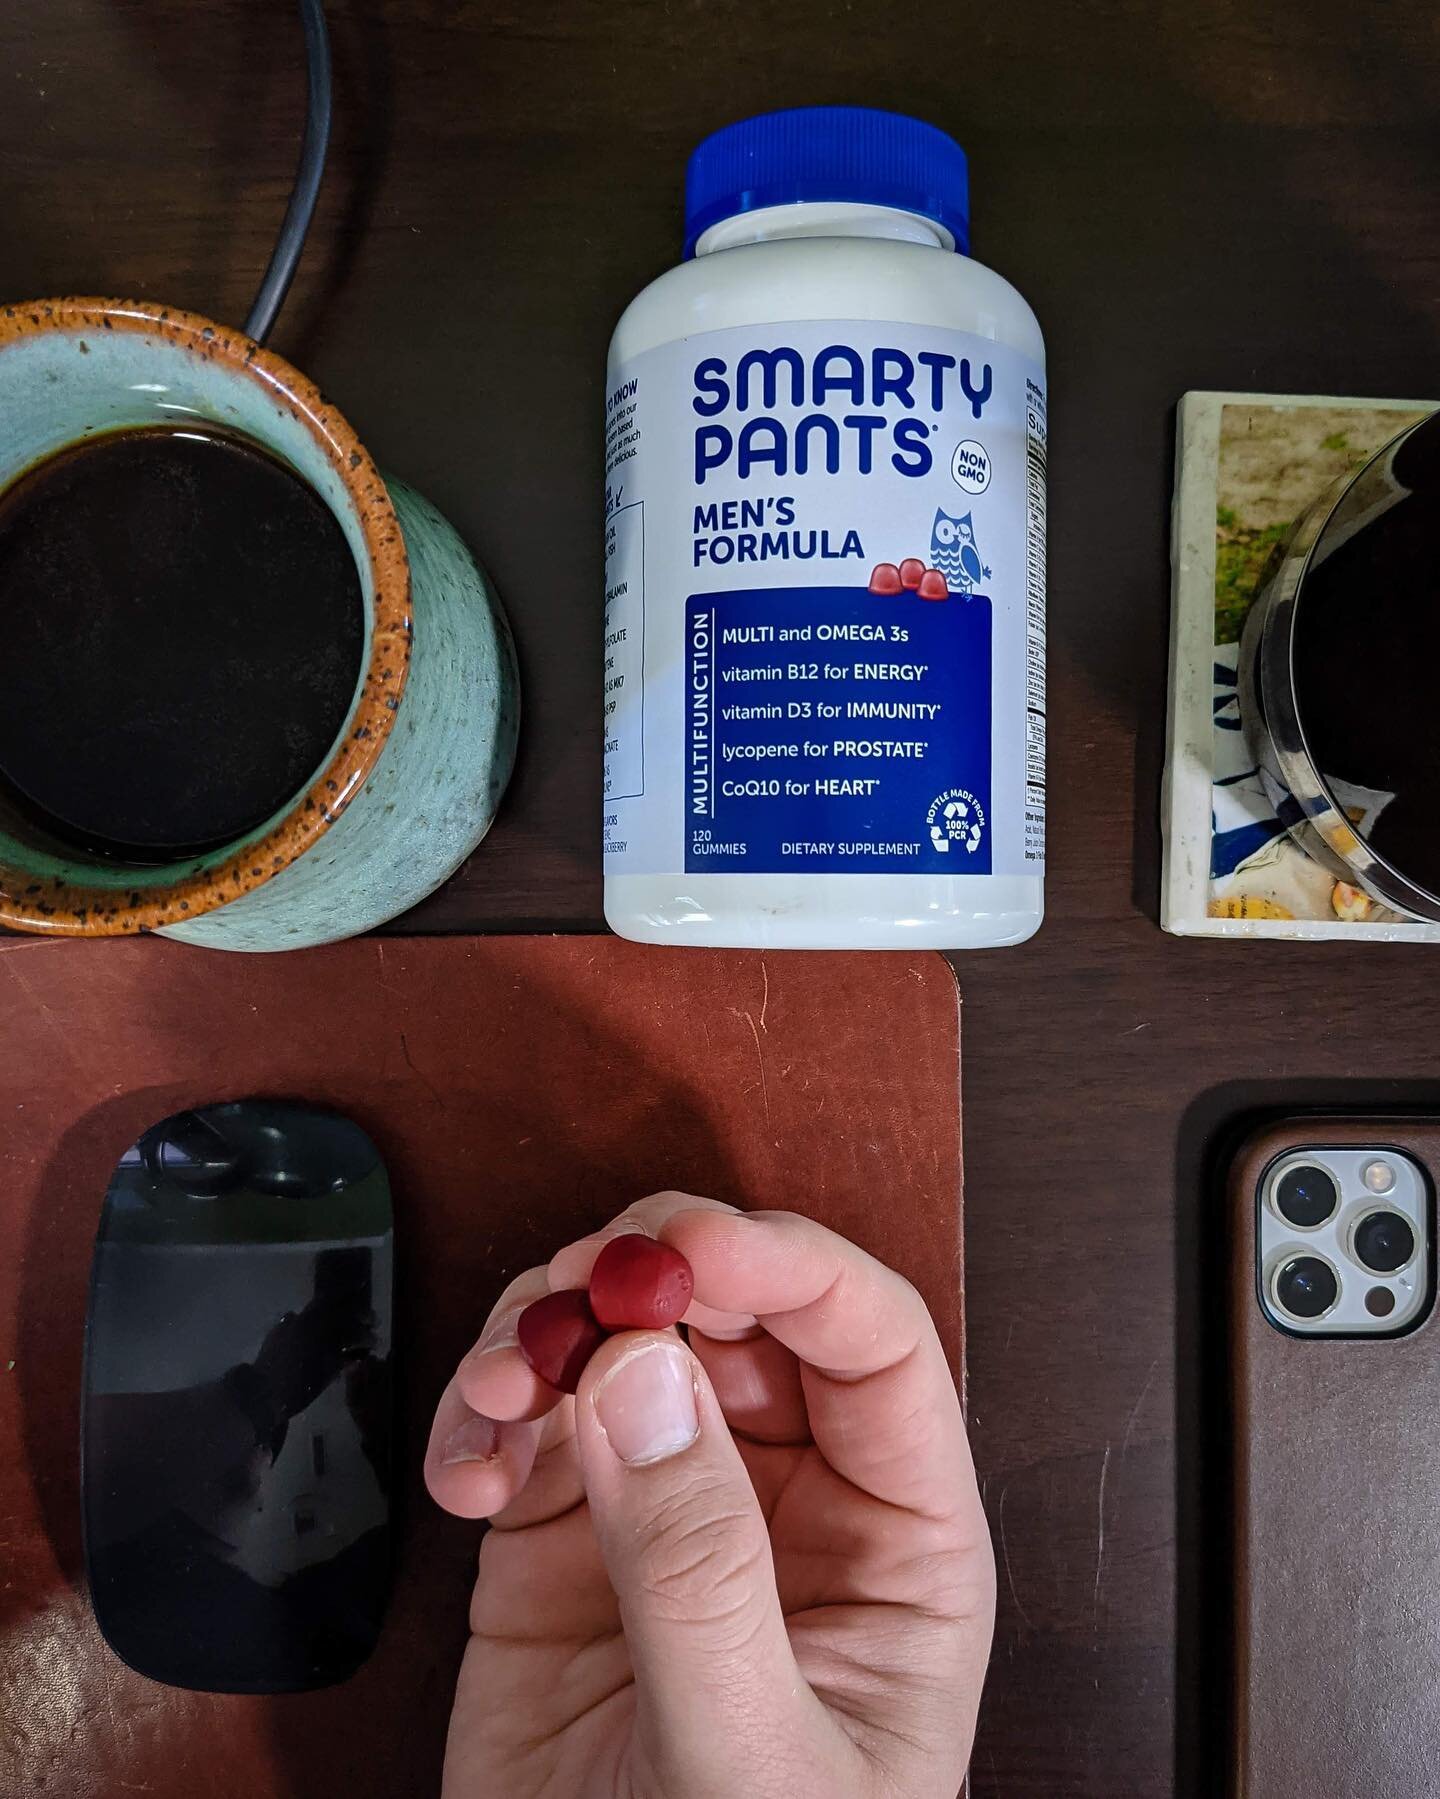 Morning routine 🌞 

✅ coffee ☕️ 
✅ emails 📧 
✅ social media📱 
✅ @SmartyPants vitamins 💊 

SmartyPants Men's Formula tastes great 👍 gummies made without artificial sweeteners, fillers, or flavors. SmartyPants vitamins help with getting my Vitamin